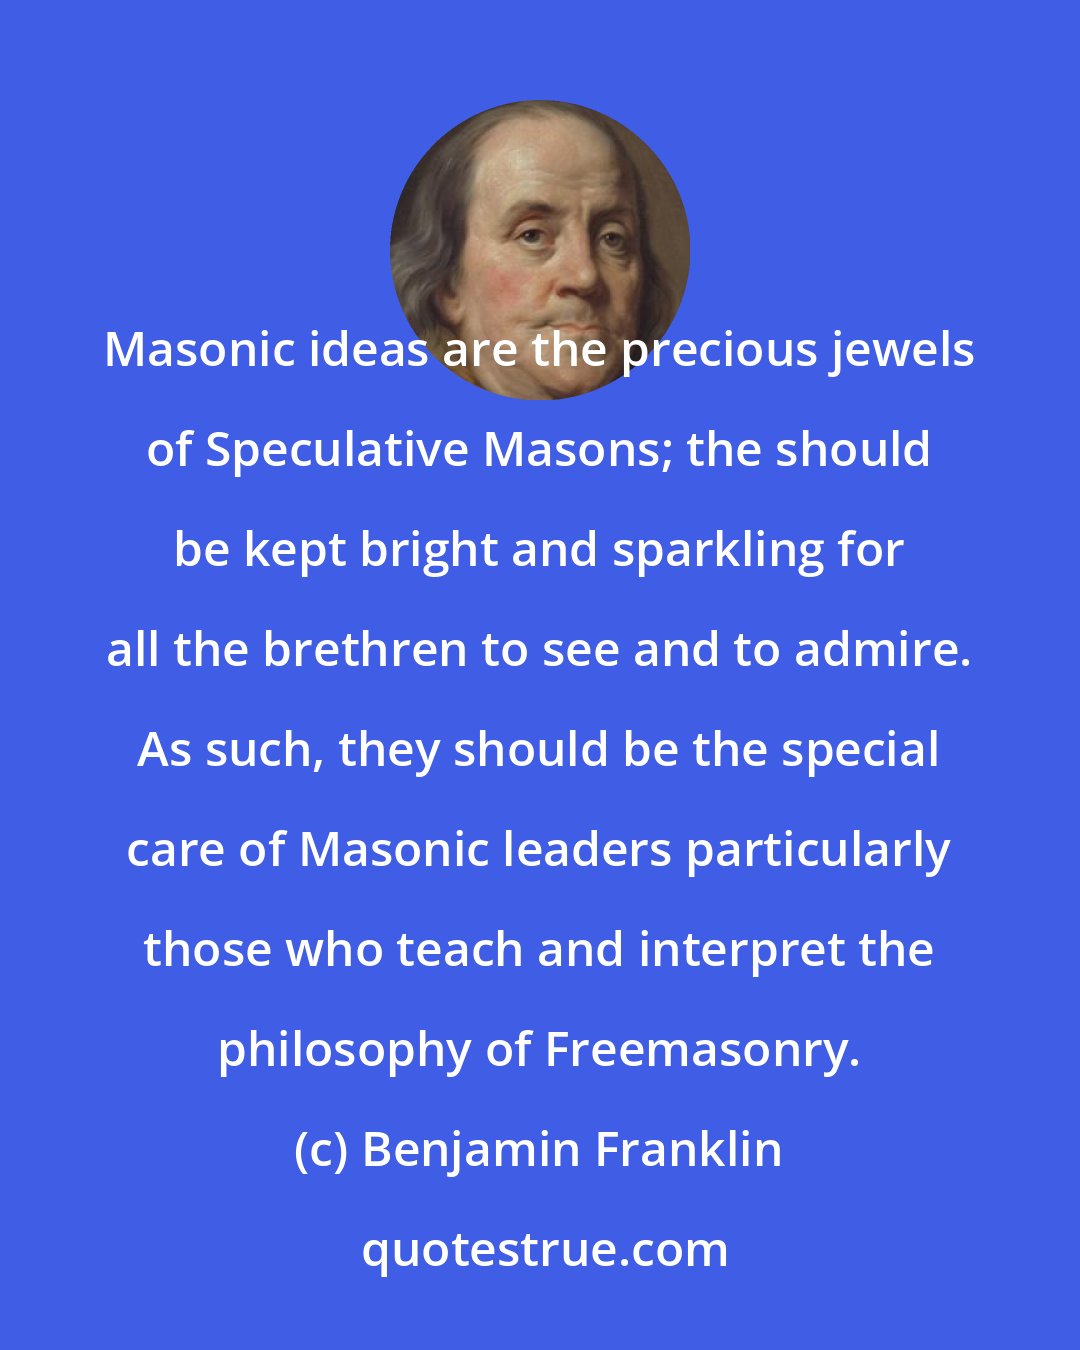 Benjamin Franklin: Masonic ideas are the precious jewels of Speculative Masons; the should be kept bright and sparkling for all the brethren to see and to admire. As such, they should be the special care of Masonic leaders particularly those who teach and interpret the philosophy of Freemasonry.